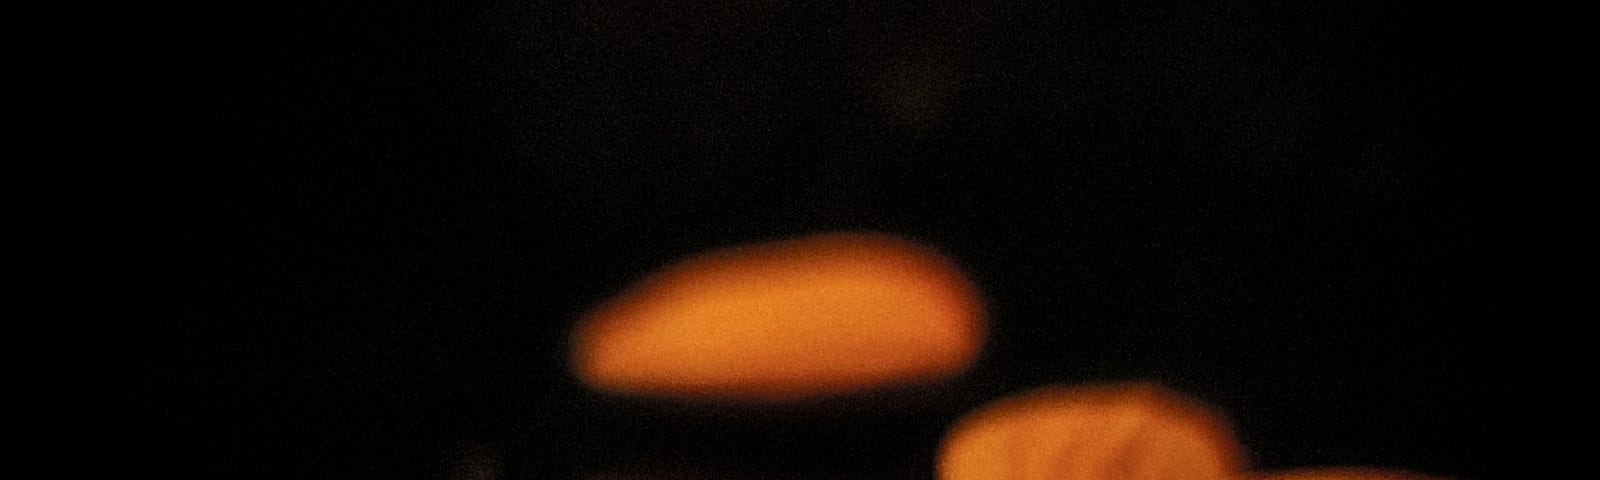 Half a dozen almonds, sharp in the foreground and blurry in the back. Black background.